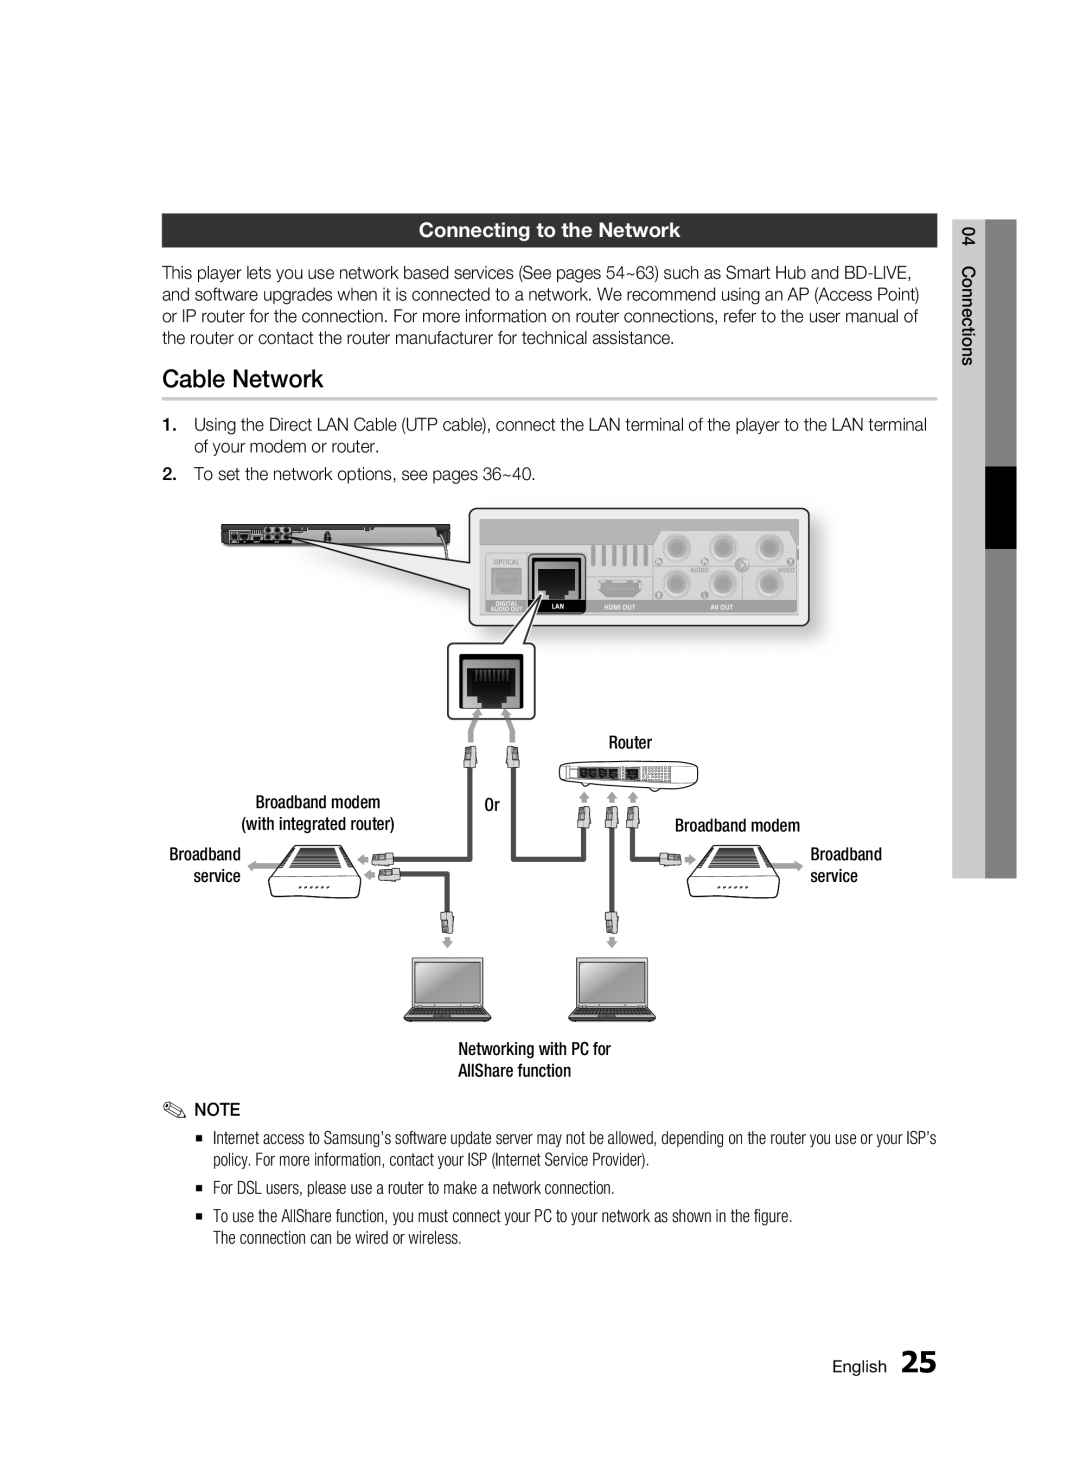 Samsung BD-D6500 user manual Cable Network, Connecting to the Network 